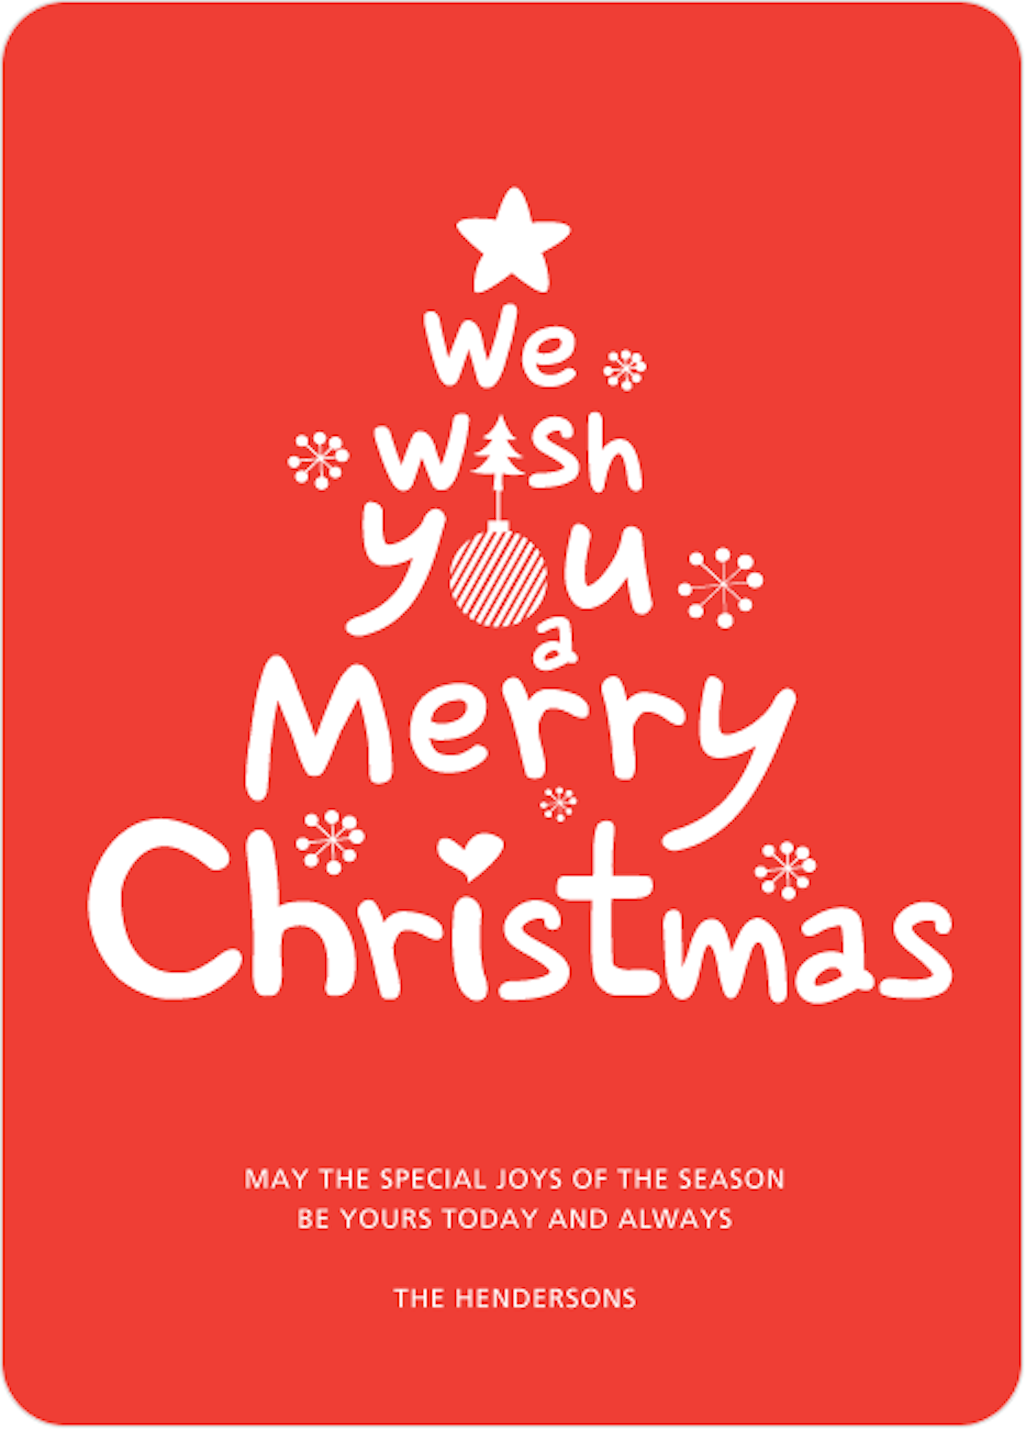 We wish You a merry Christmas!